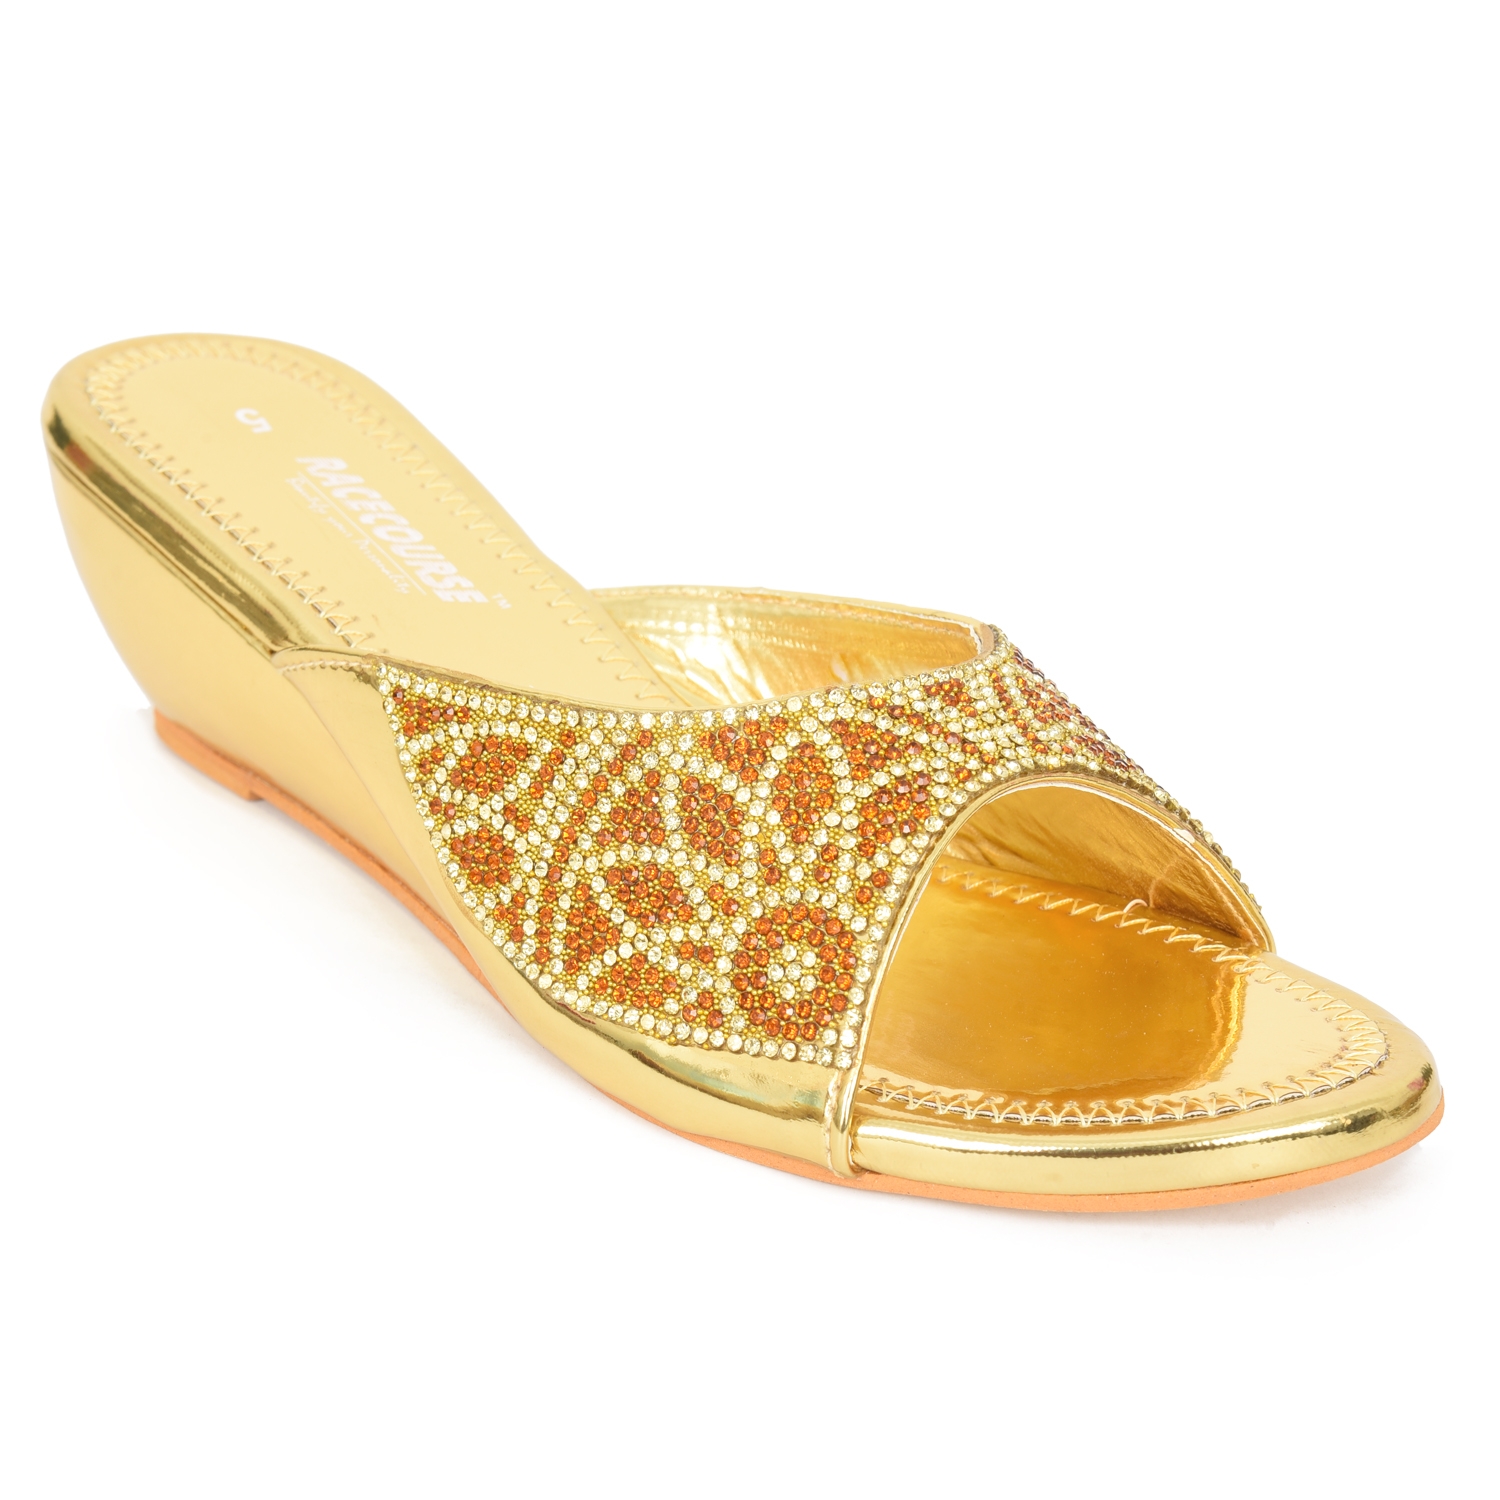 Racecourse | Racecourse Women's Titanic Heel Saro Sole Ready Made China Upper Partywear News With the Heel Height of 2 Inch 1013 Golden